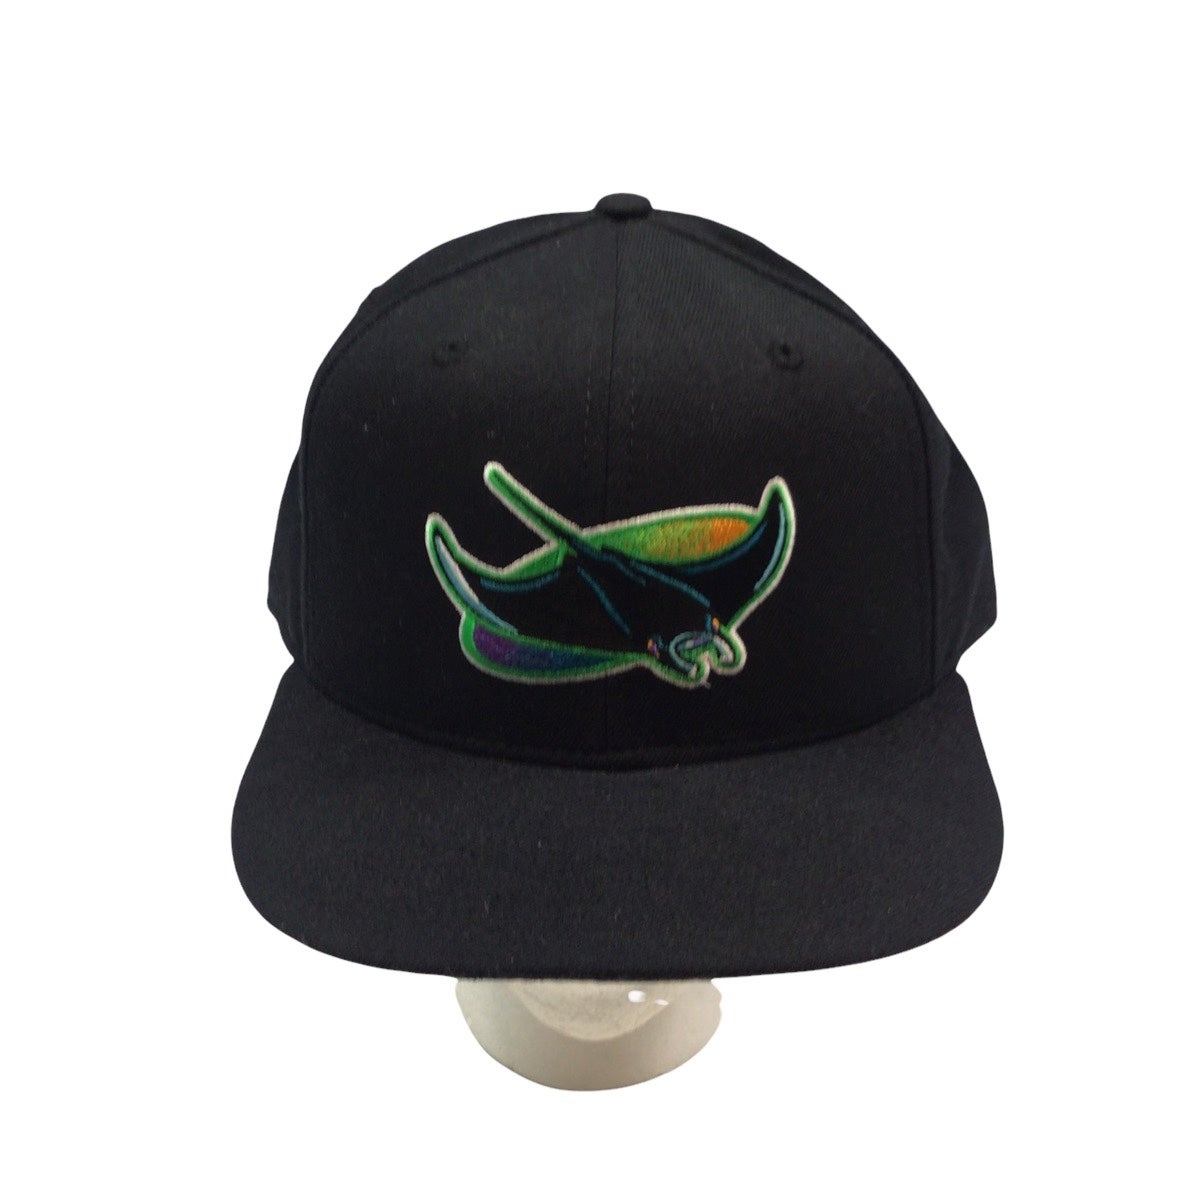 Vintage Tampa Bay Devil Rays New Era MLB wool fitted cap. Made in